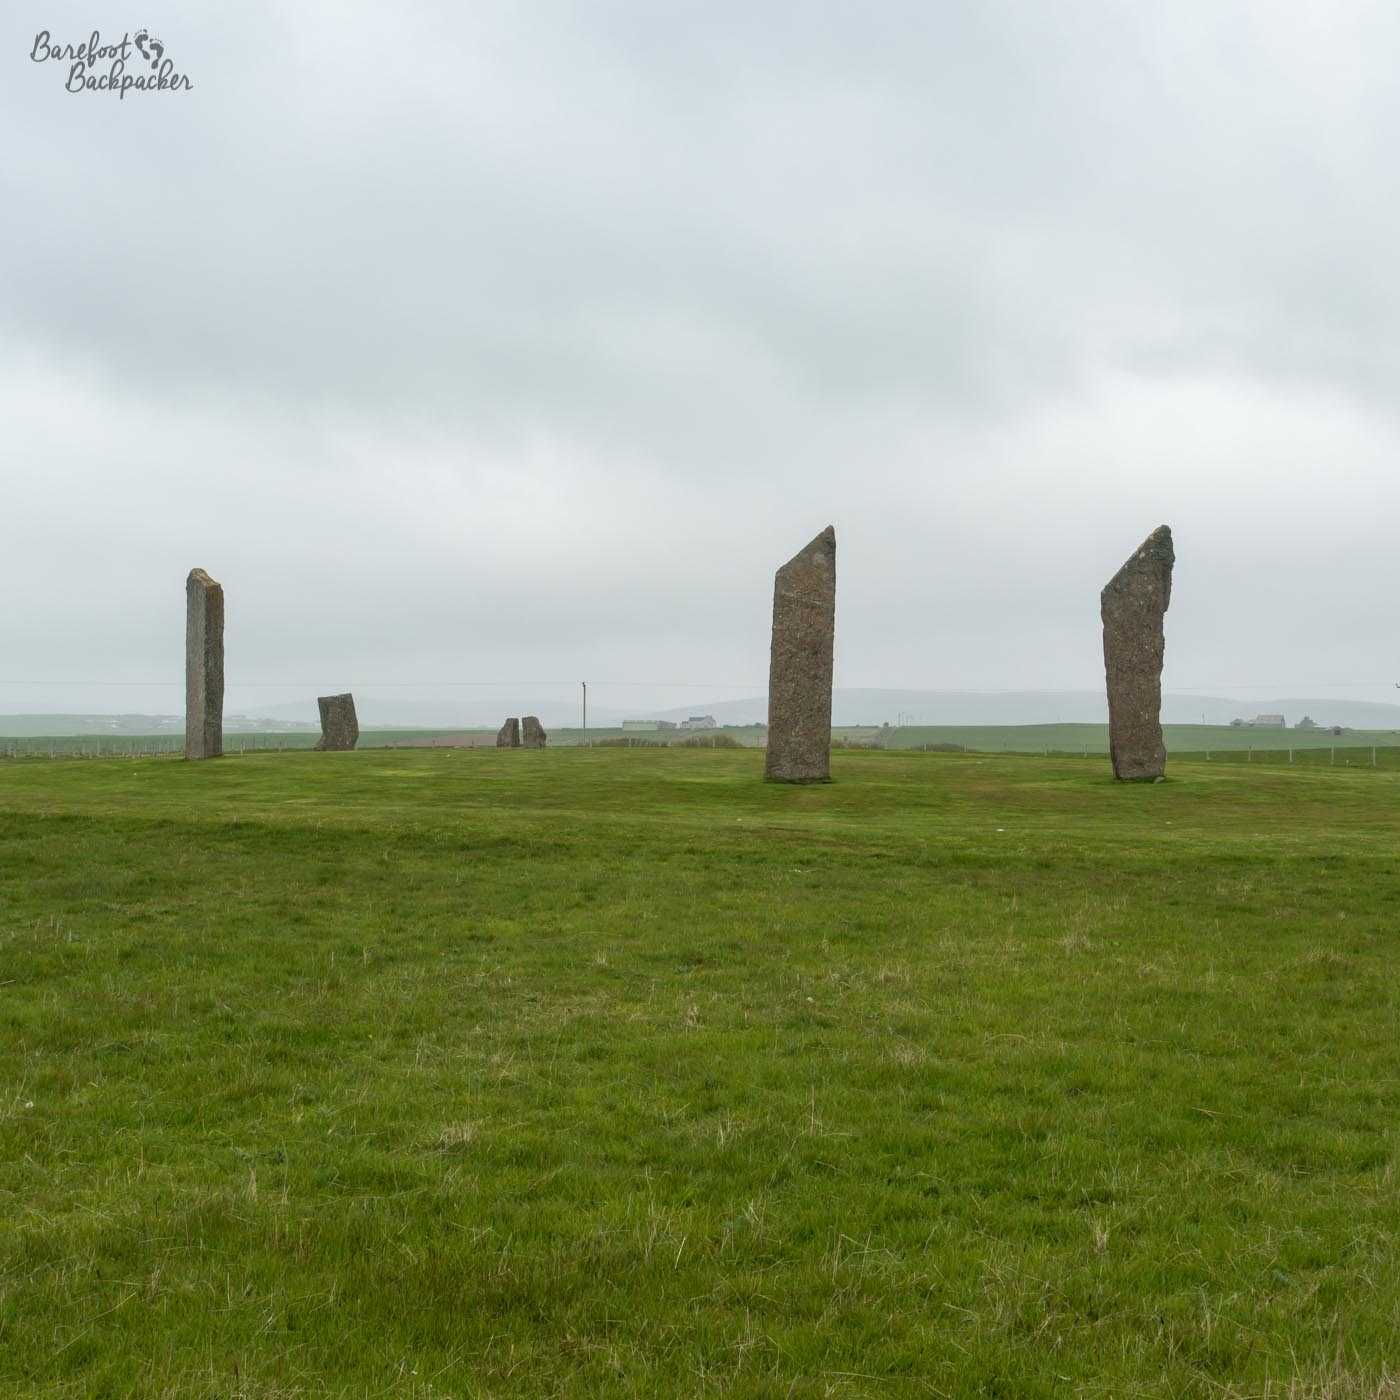 Another view of the three larger and two stumpier stones. On this pic the layout is clearer – the stones are set in such a way that you can visualise a circle, and the grass they're standing on is slightly raised compared to the rest of the field.